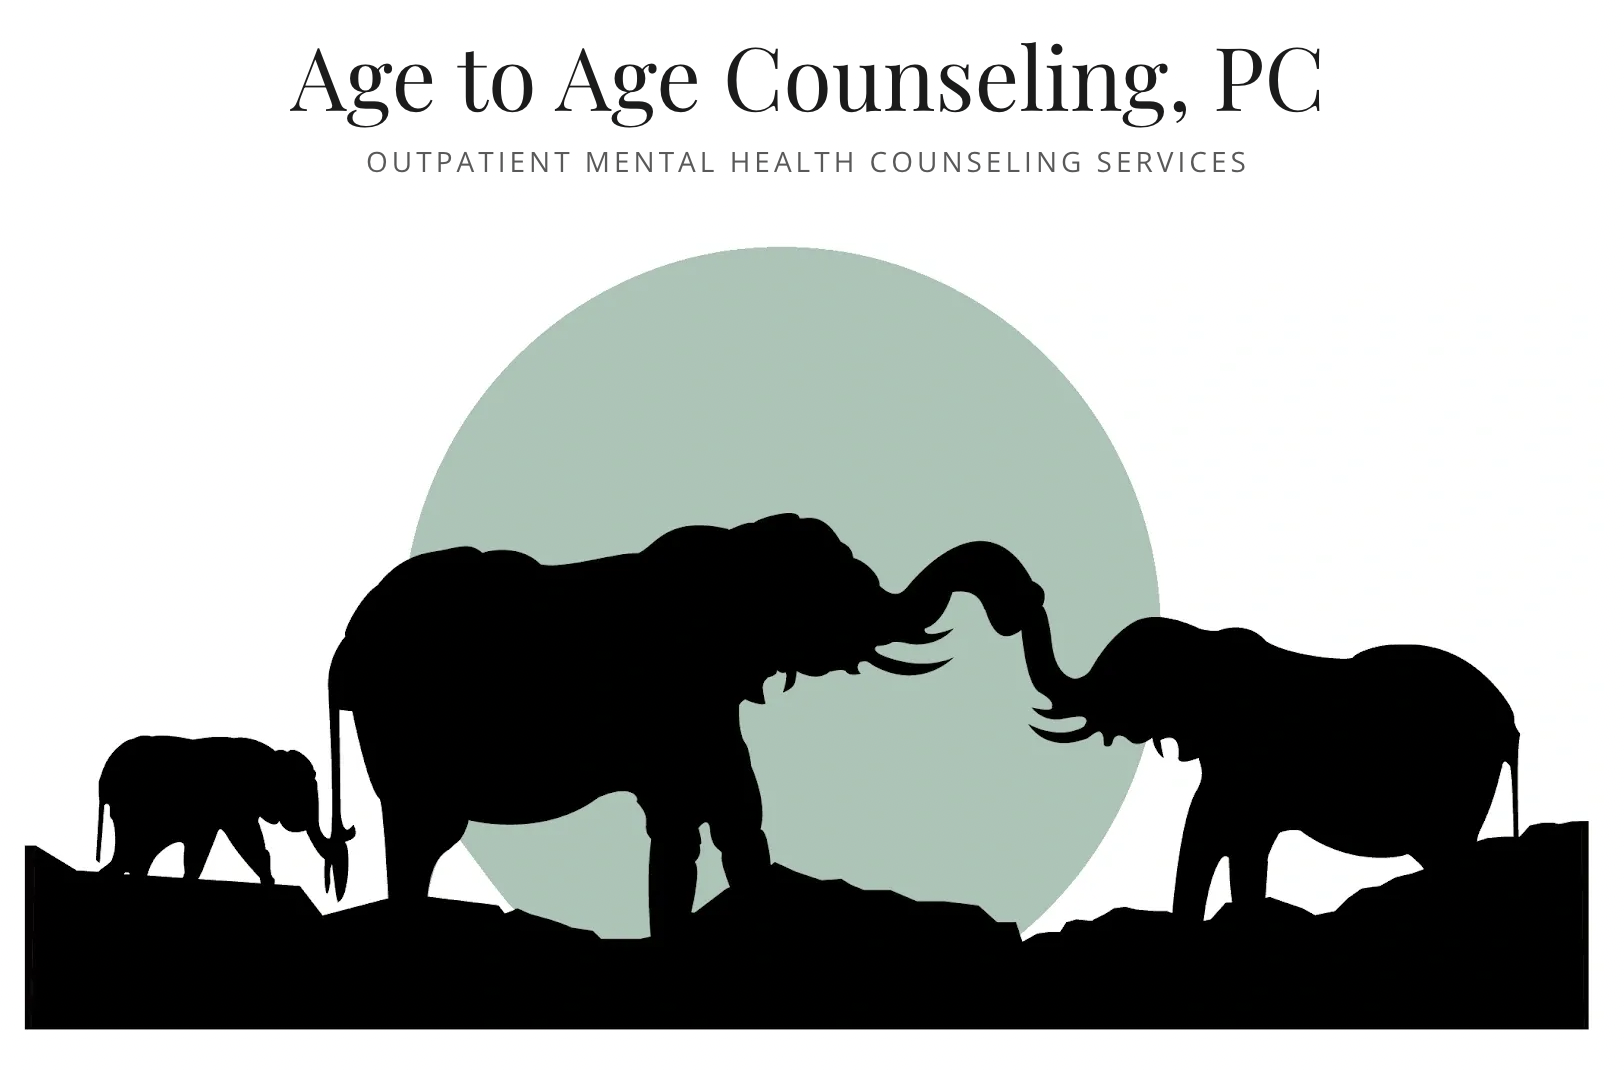 Age to Age Counseling PC logo